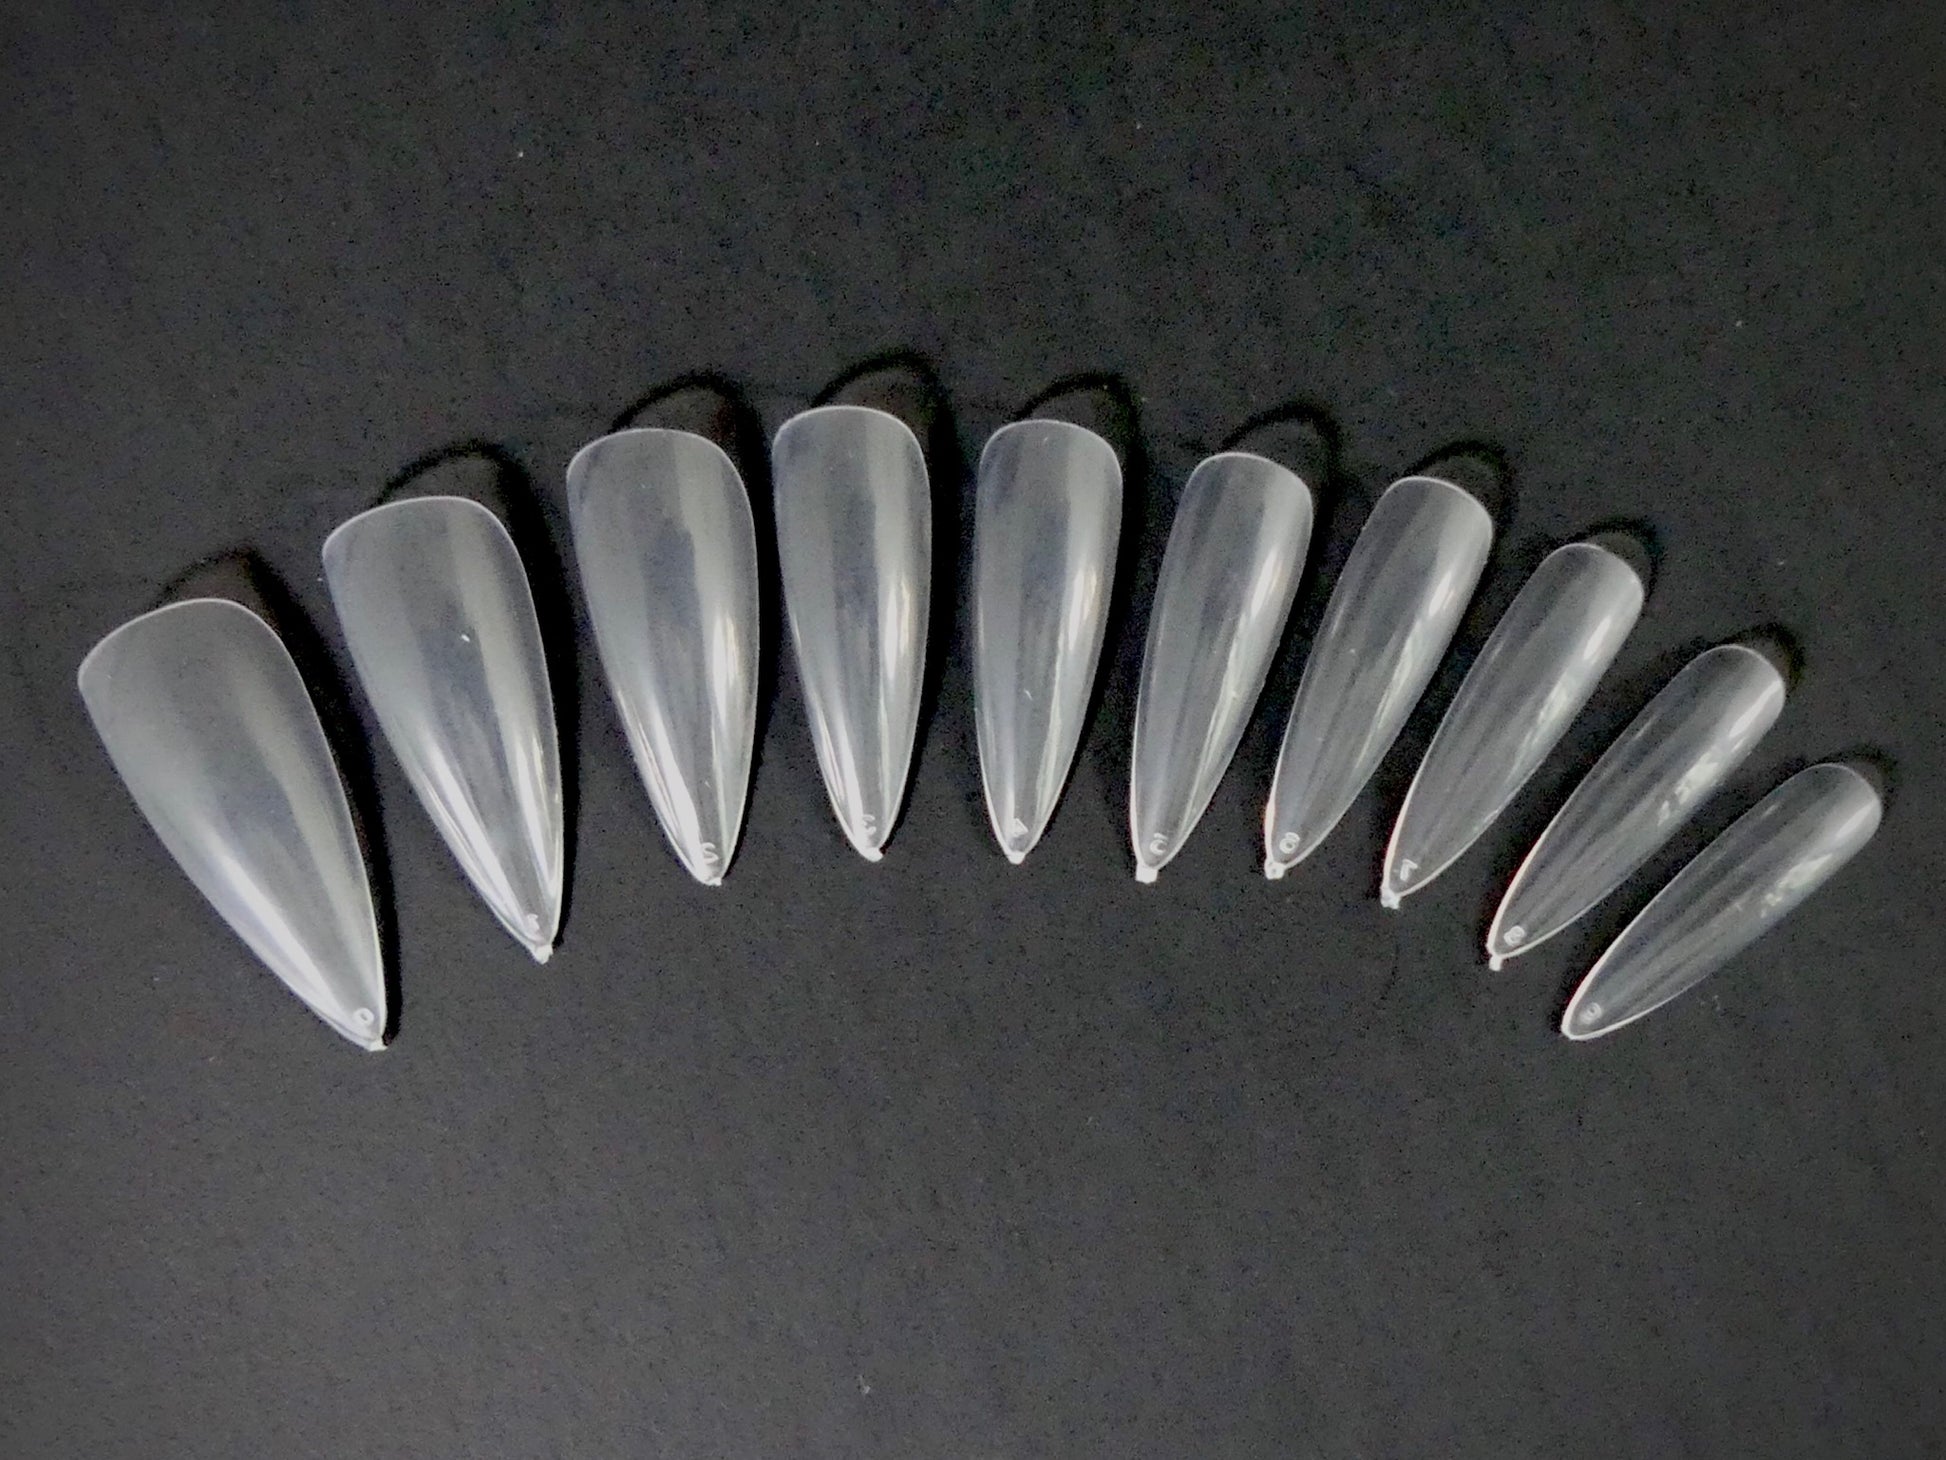 Stiletto Press On Clear Tips, 500ct / 10 sizes - My Little Nail Art Shop